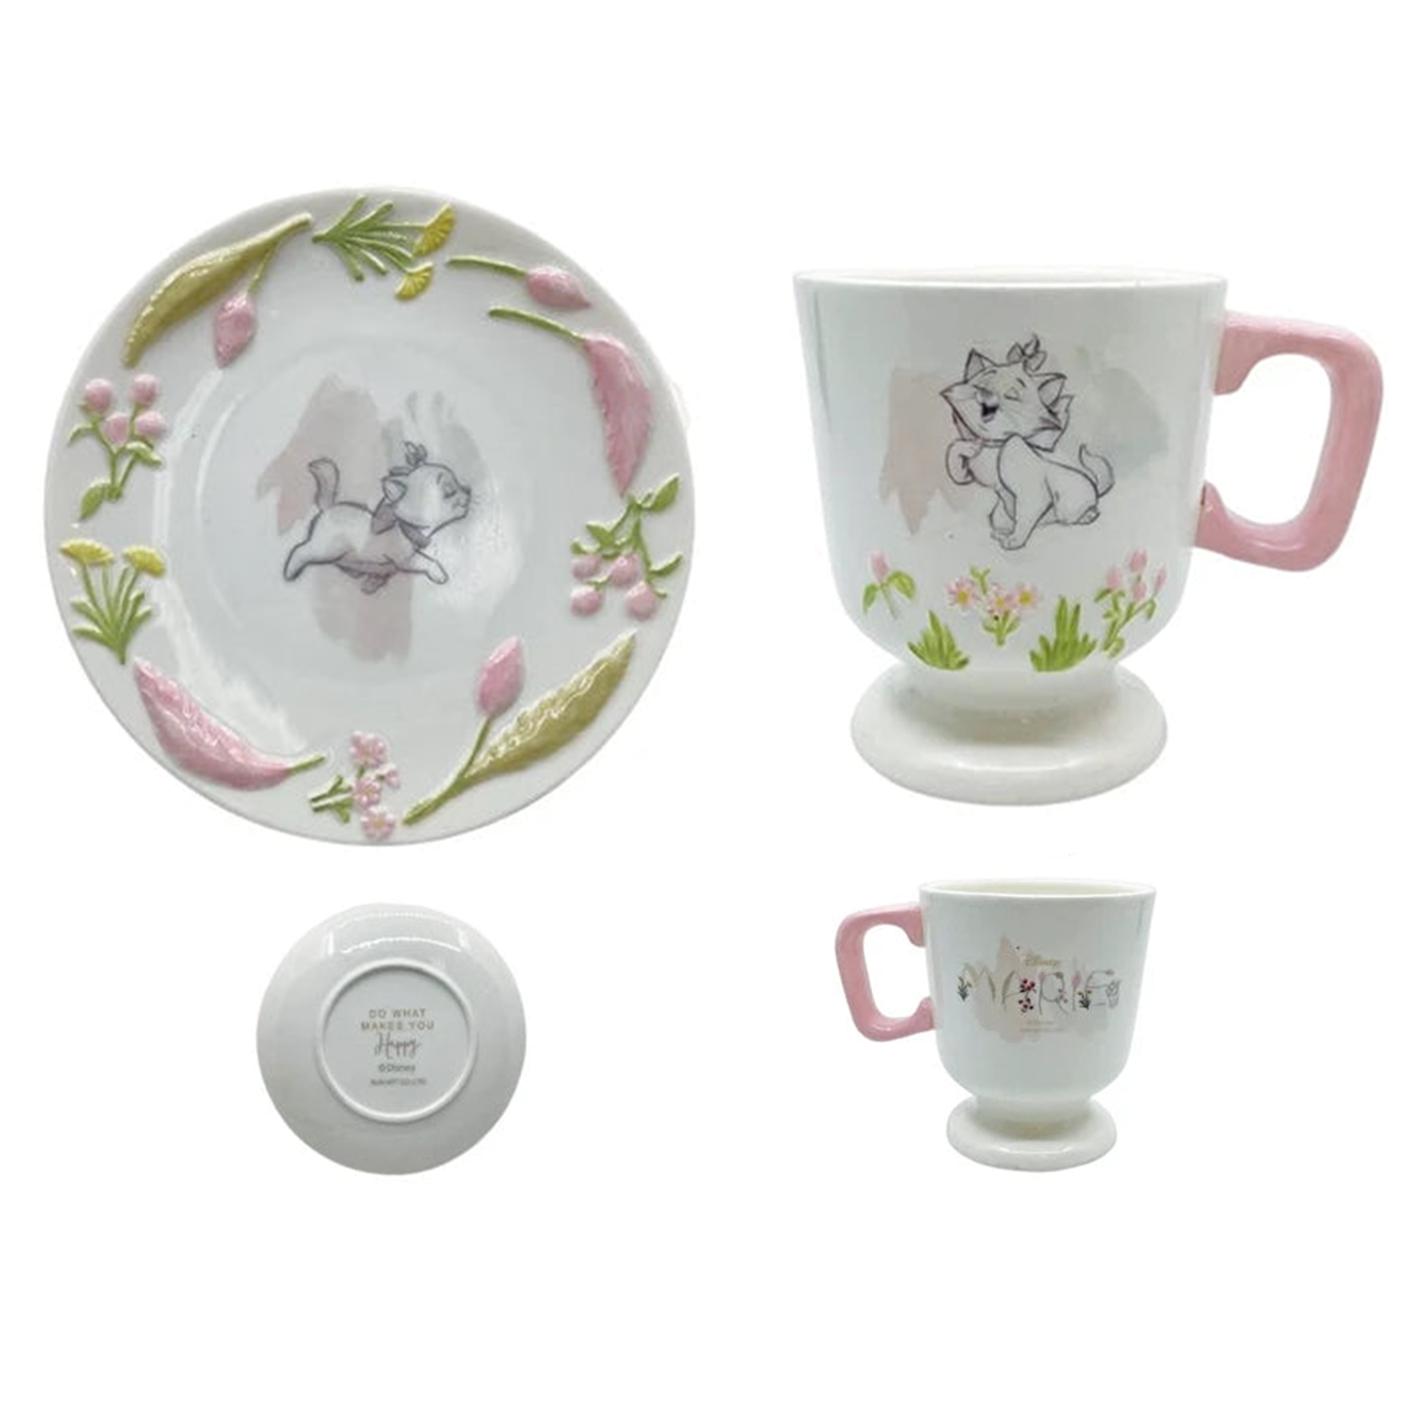  Marie cup & saucer two-piece set 